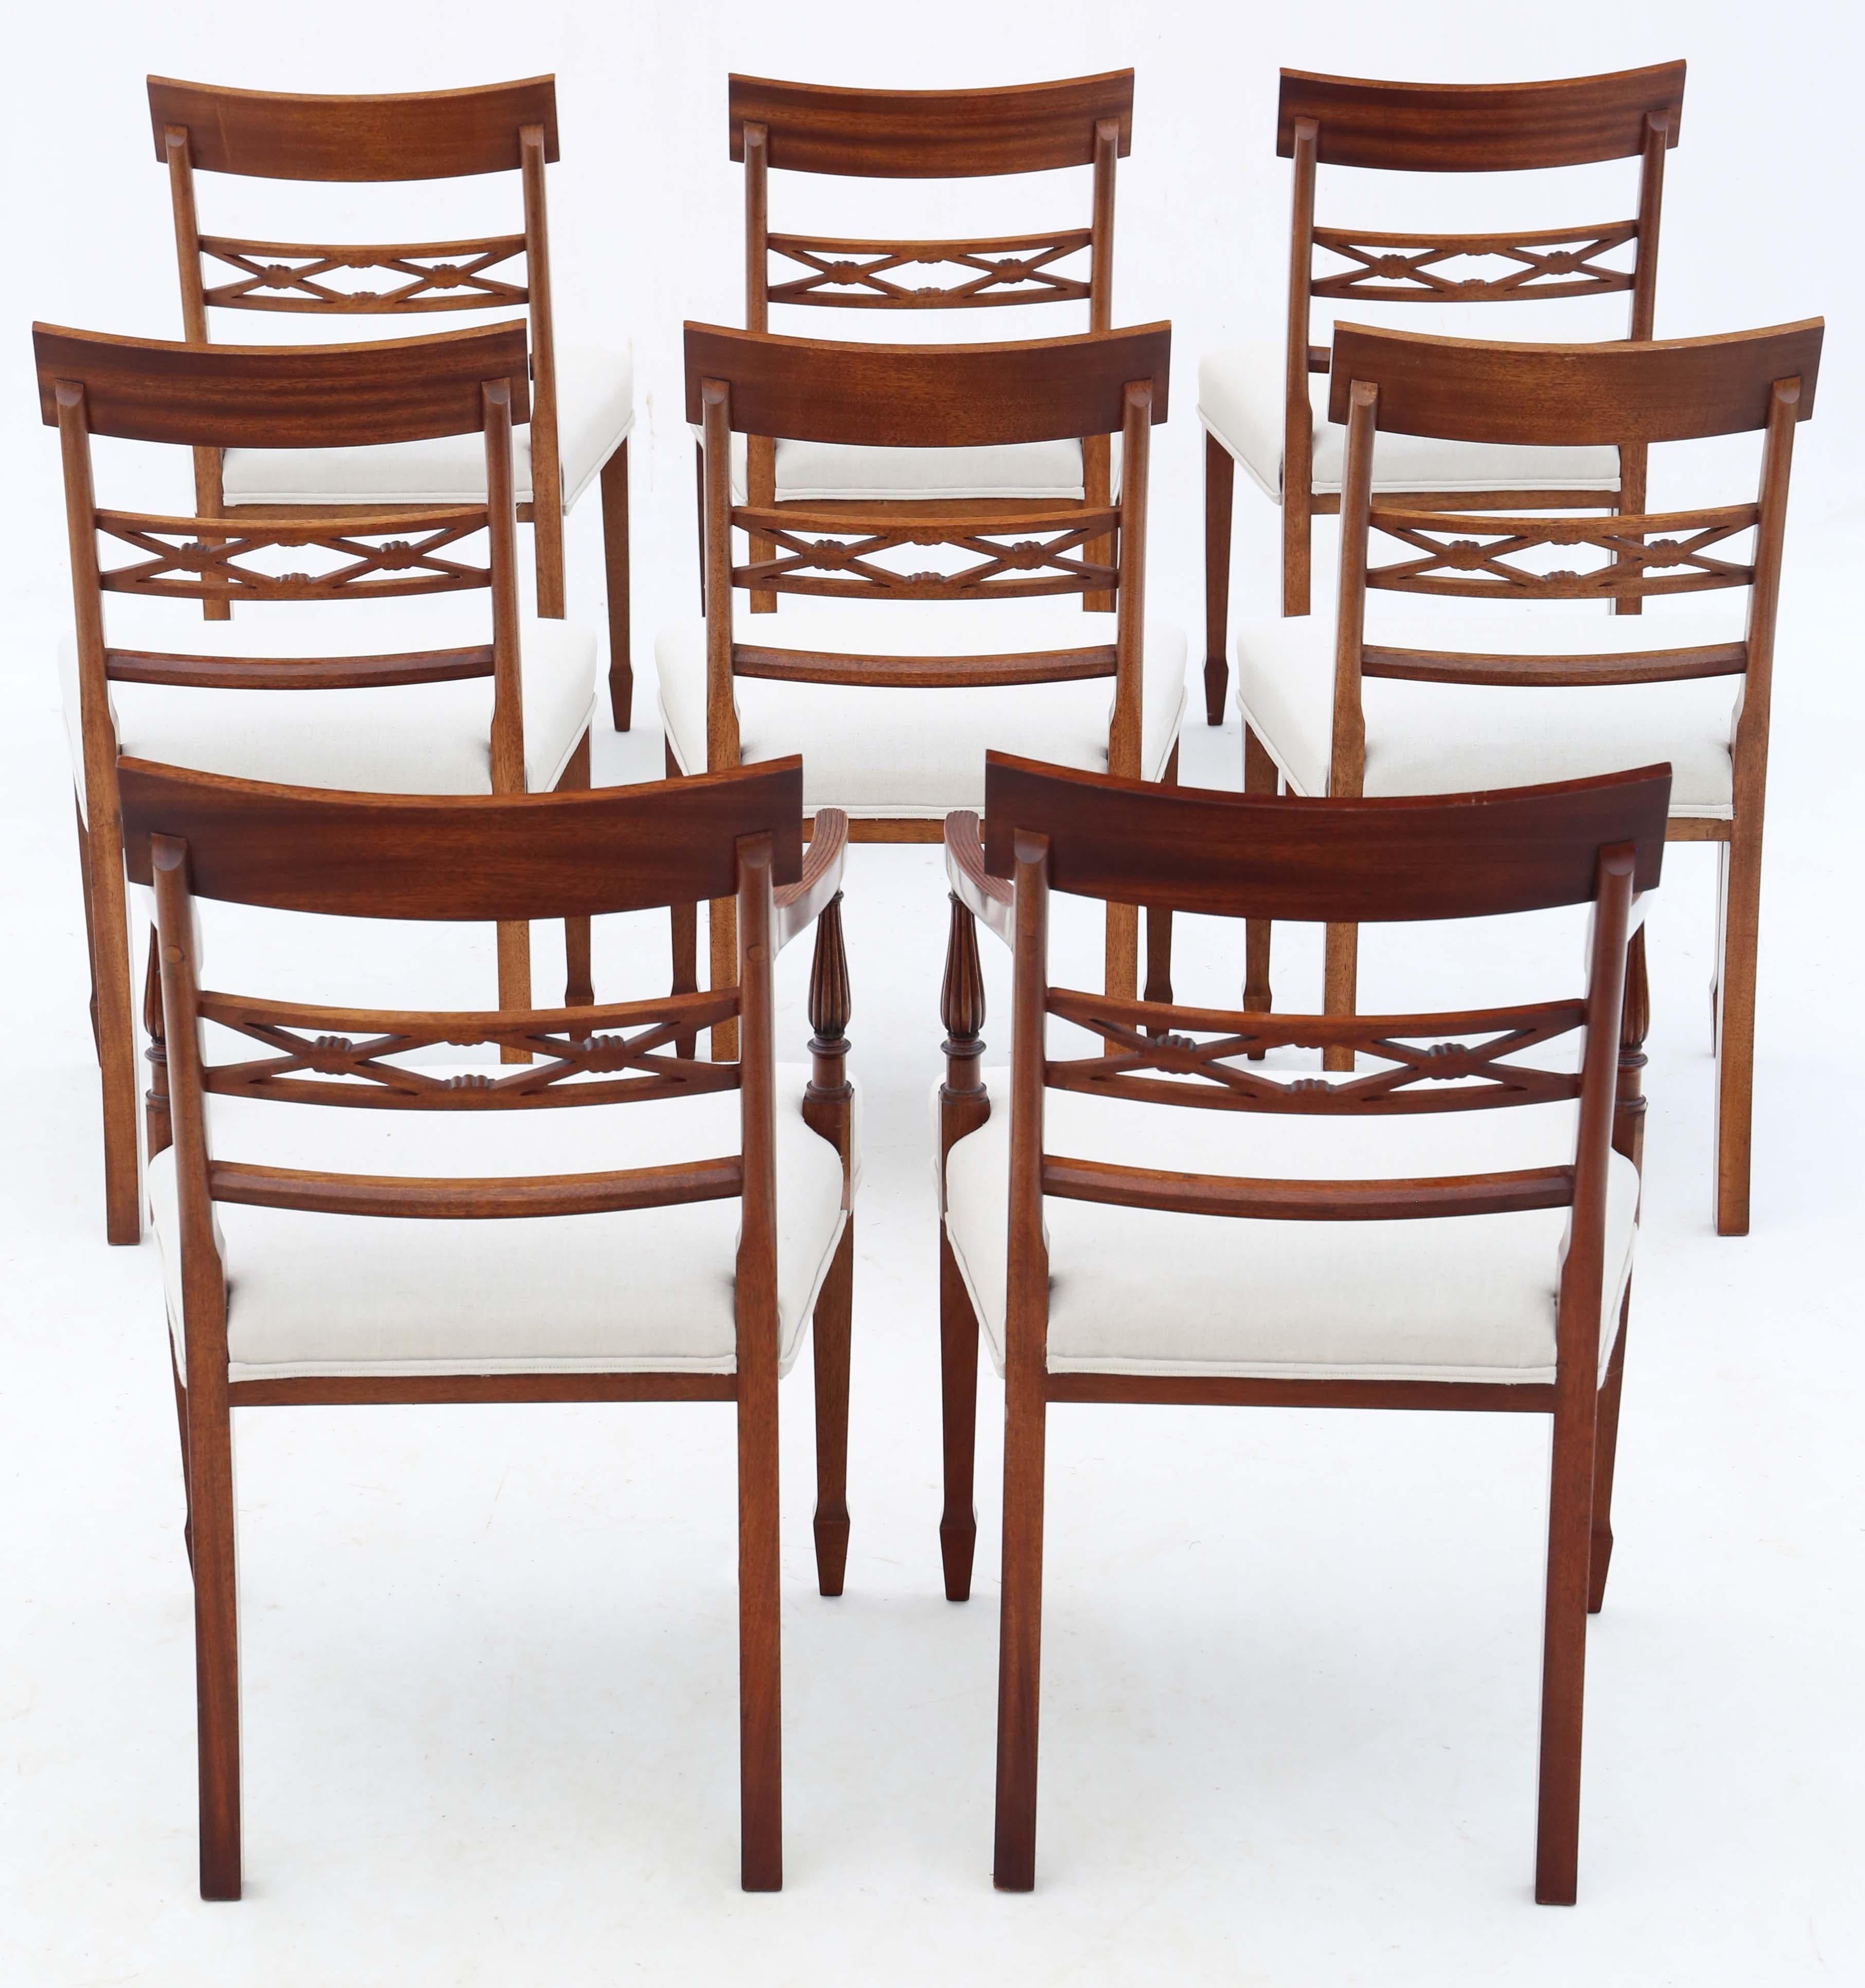 Antique vintage retro fine quality set of 8 (6 + 2) Georgian revival mahogany dining chairs. Very rare, with a simple elegant design!

Date from the mid-20th Century.

Strong with no loose joints or woodworm.

New professional upholstery.

Overall